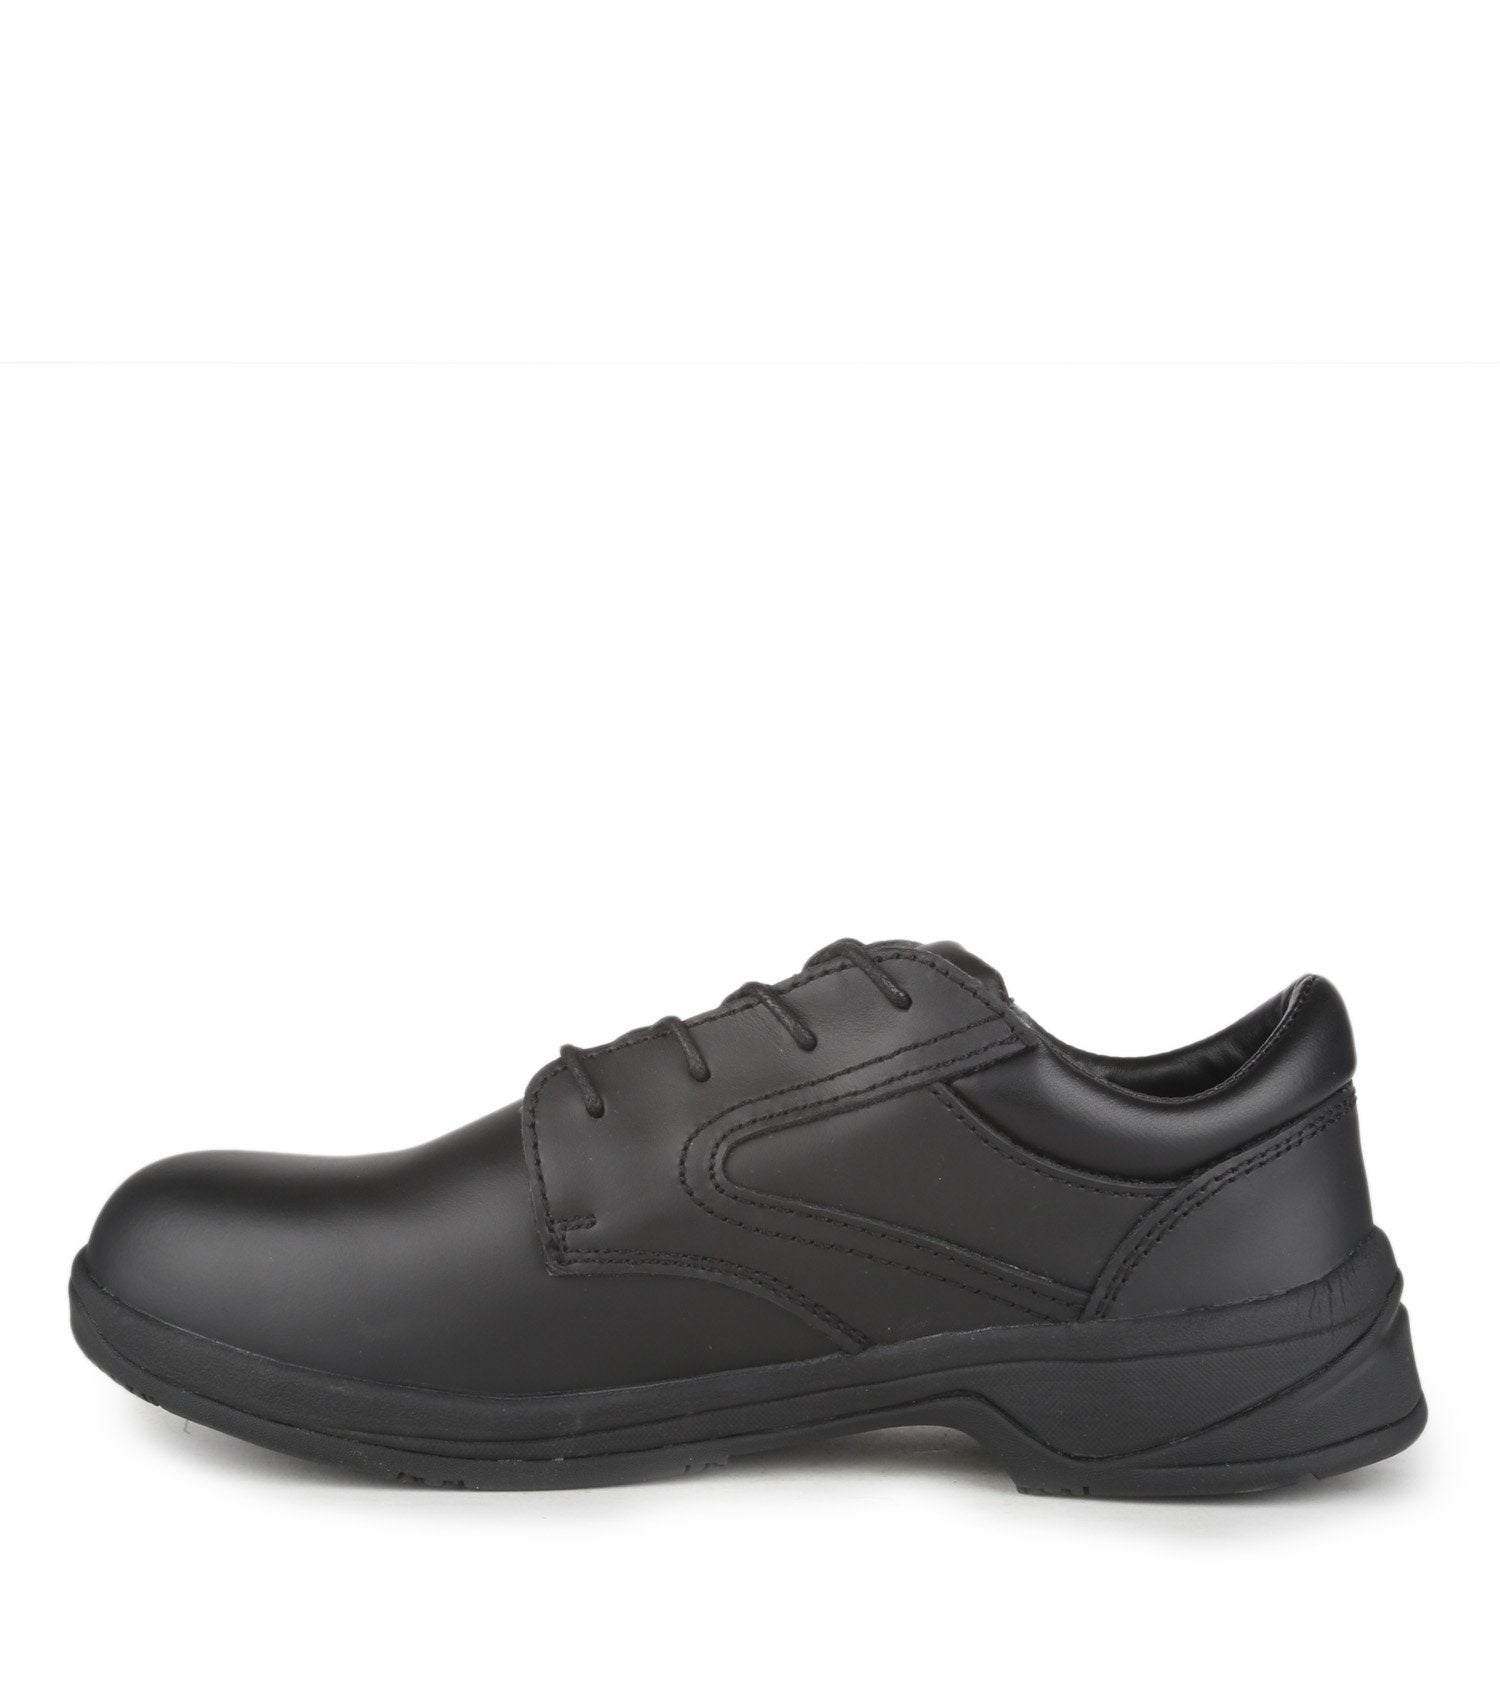 STC Brome II Safety Shoe | Black | Narrow, Medium or Wide Widths | Sizes 3.5 - 14 Work Boots - Cleanflow